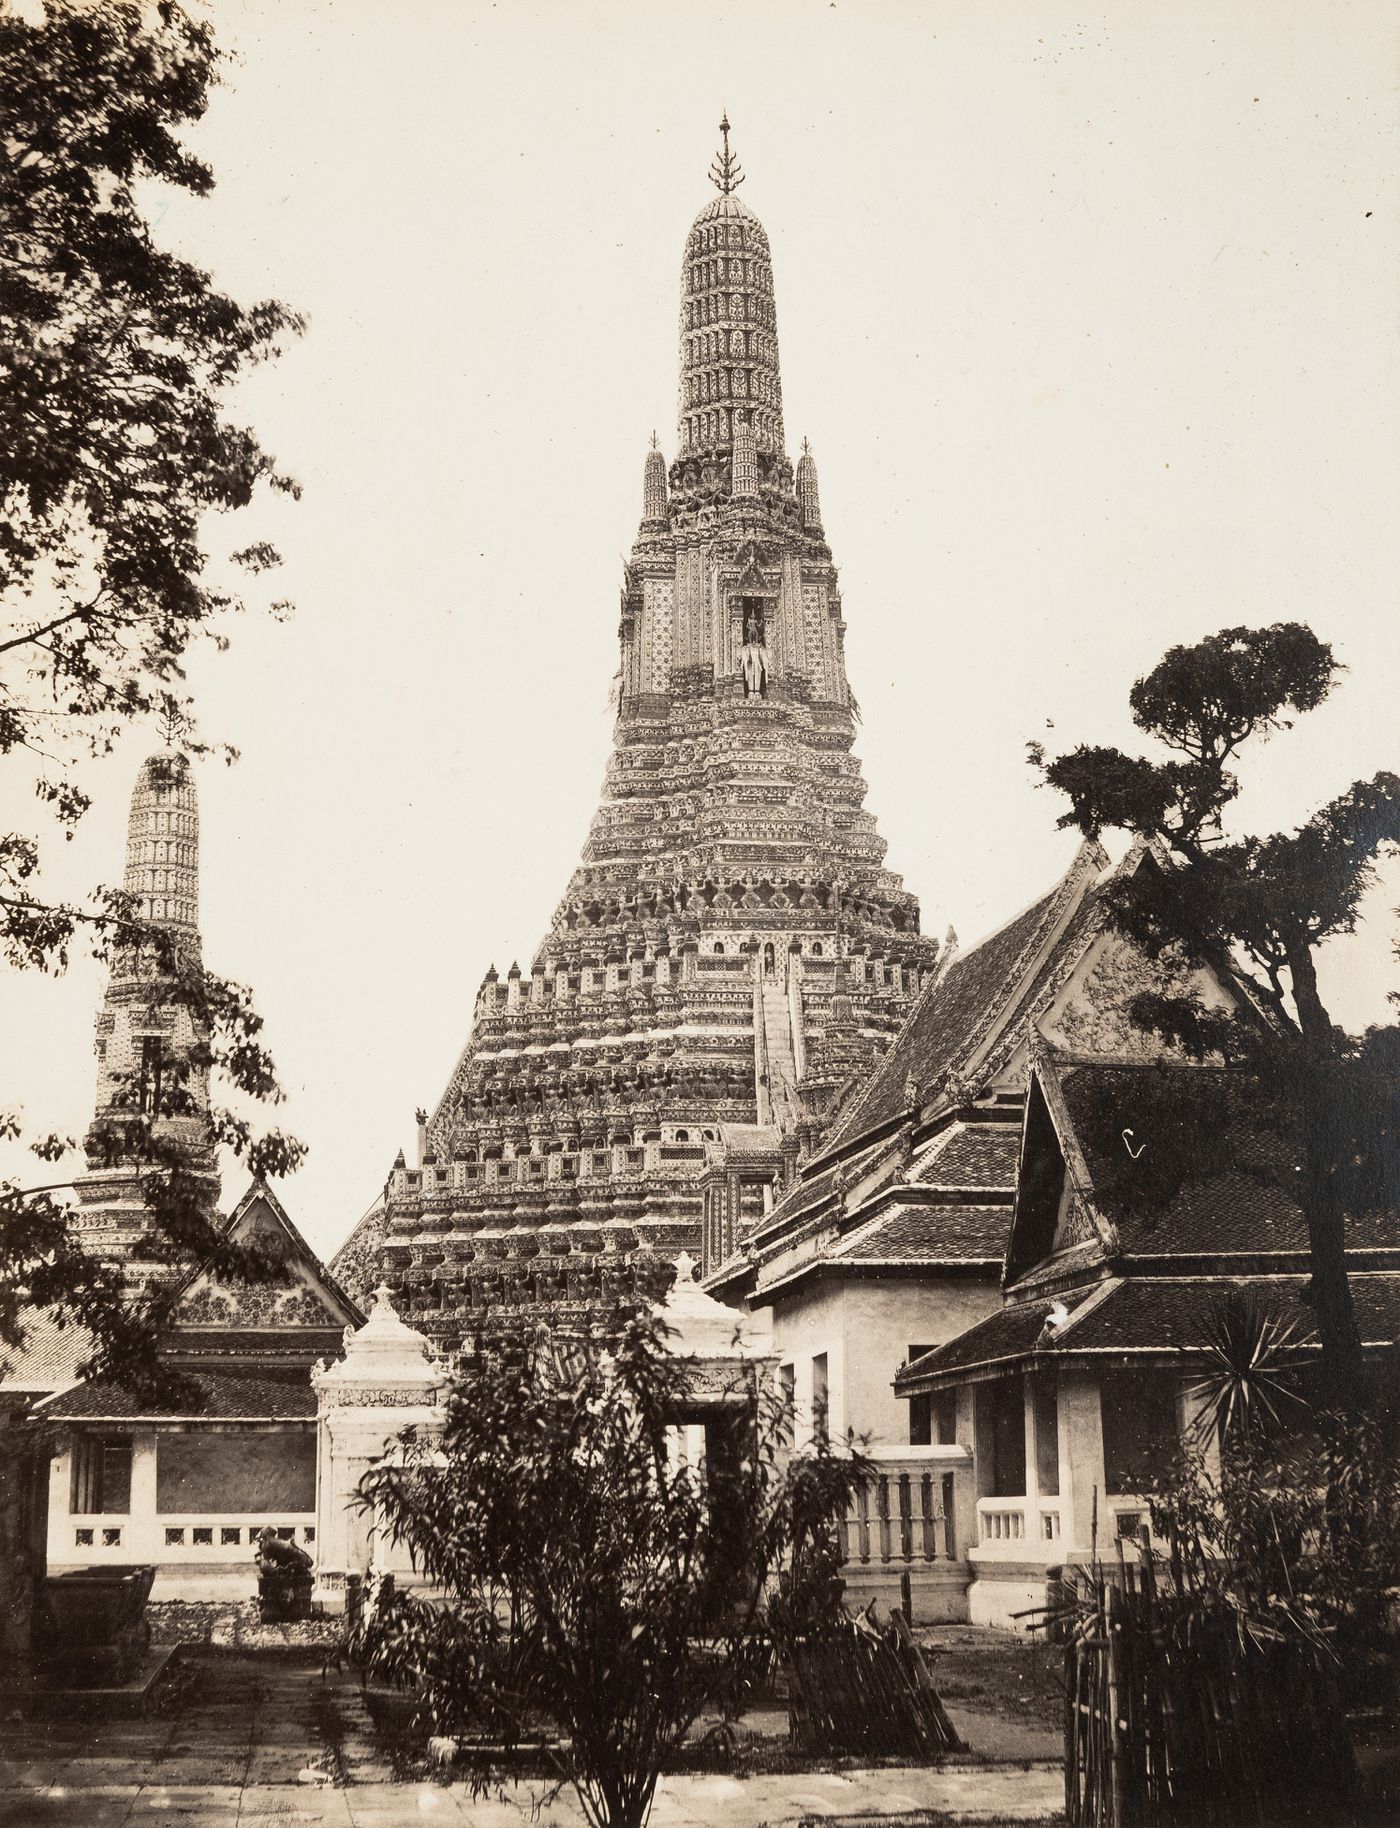 View of the Wat Arun [Temple of the Dawn] and surrounding structures, Bangkok, Thailand)